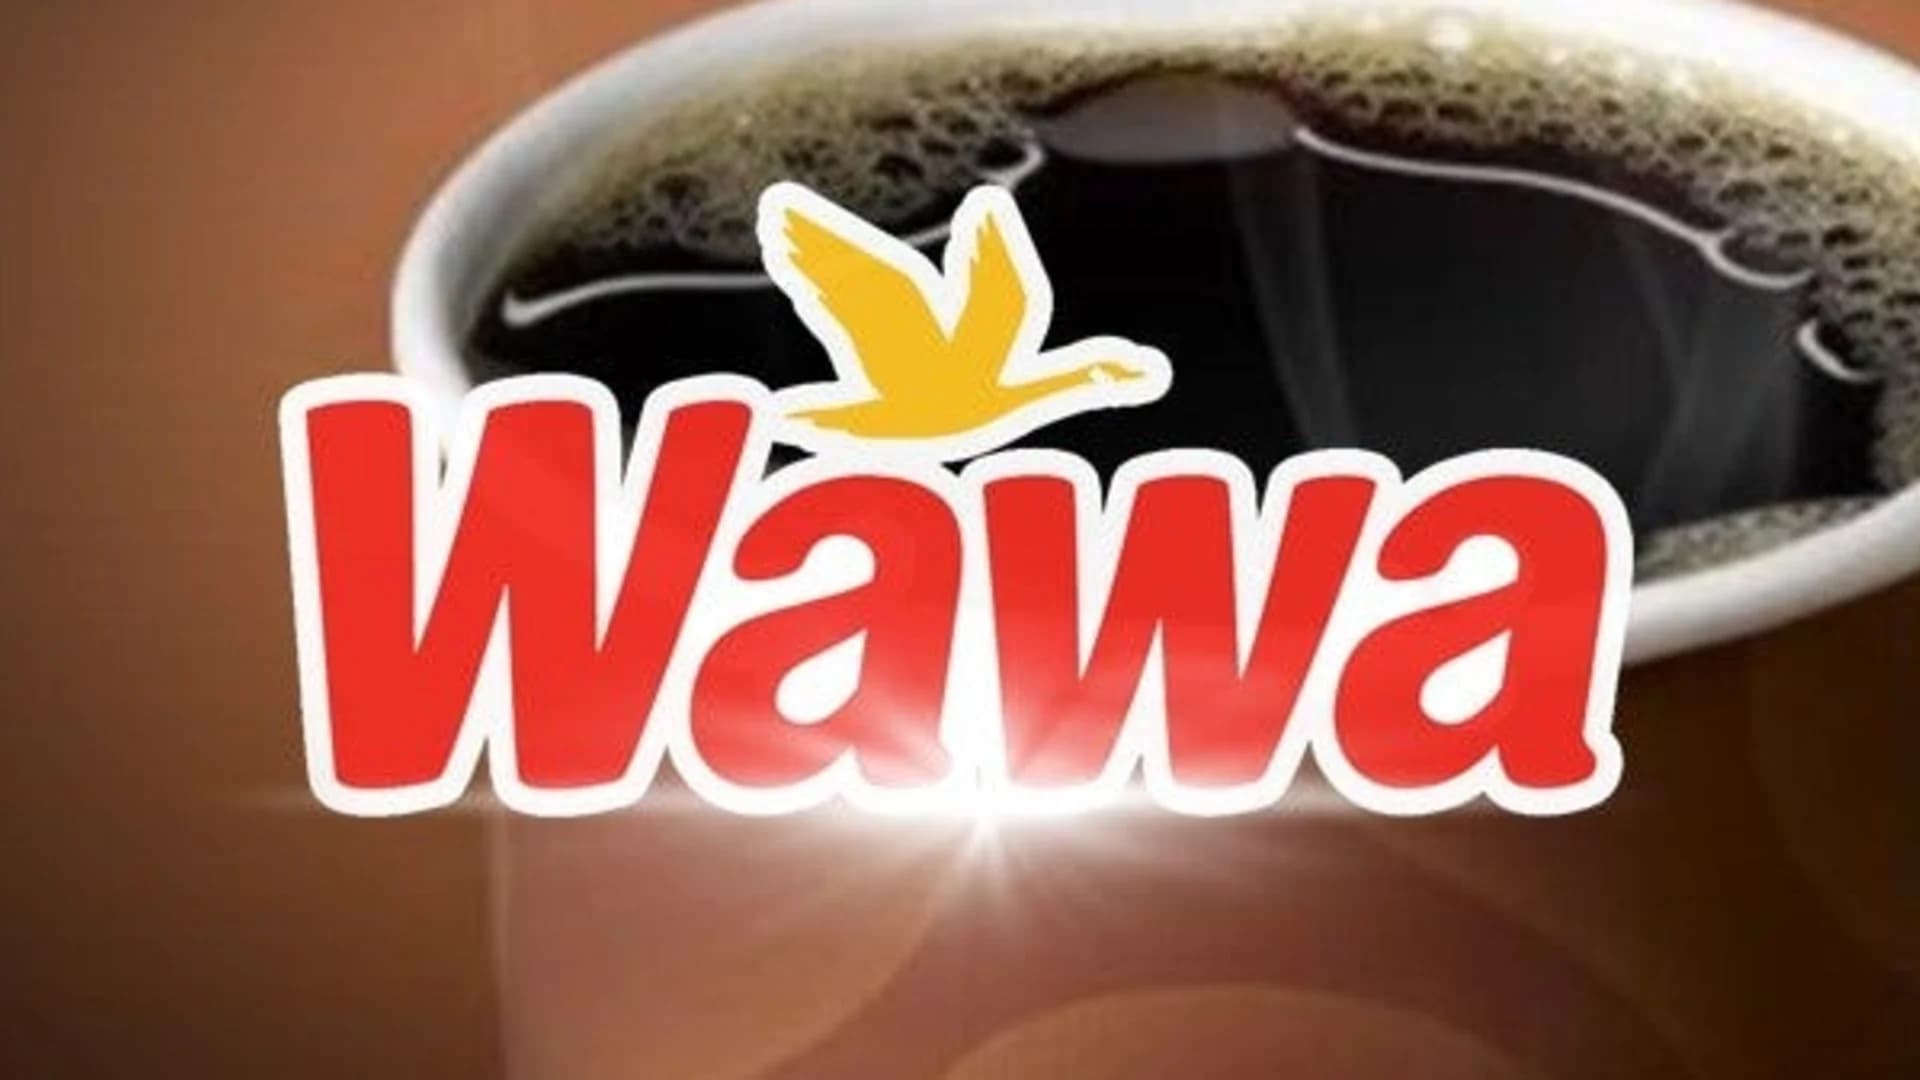 Planning board strikes down application to build New Jersey Wawa